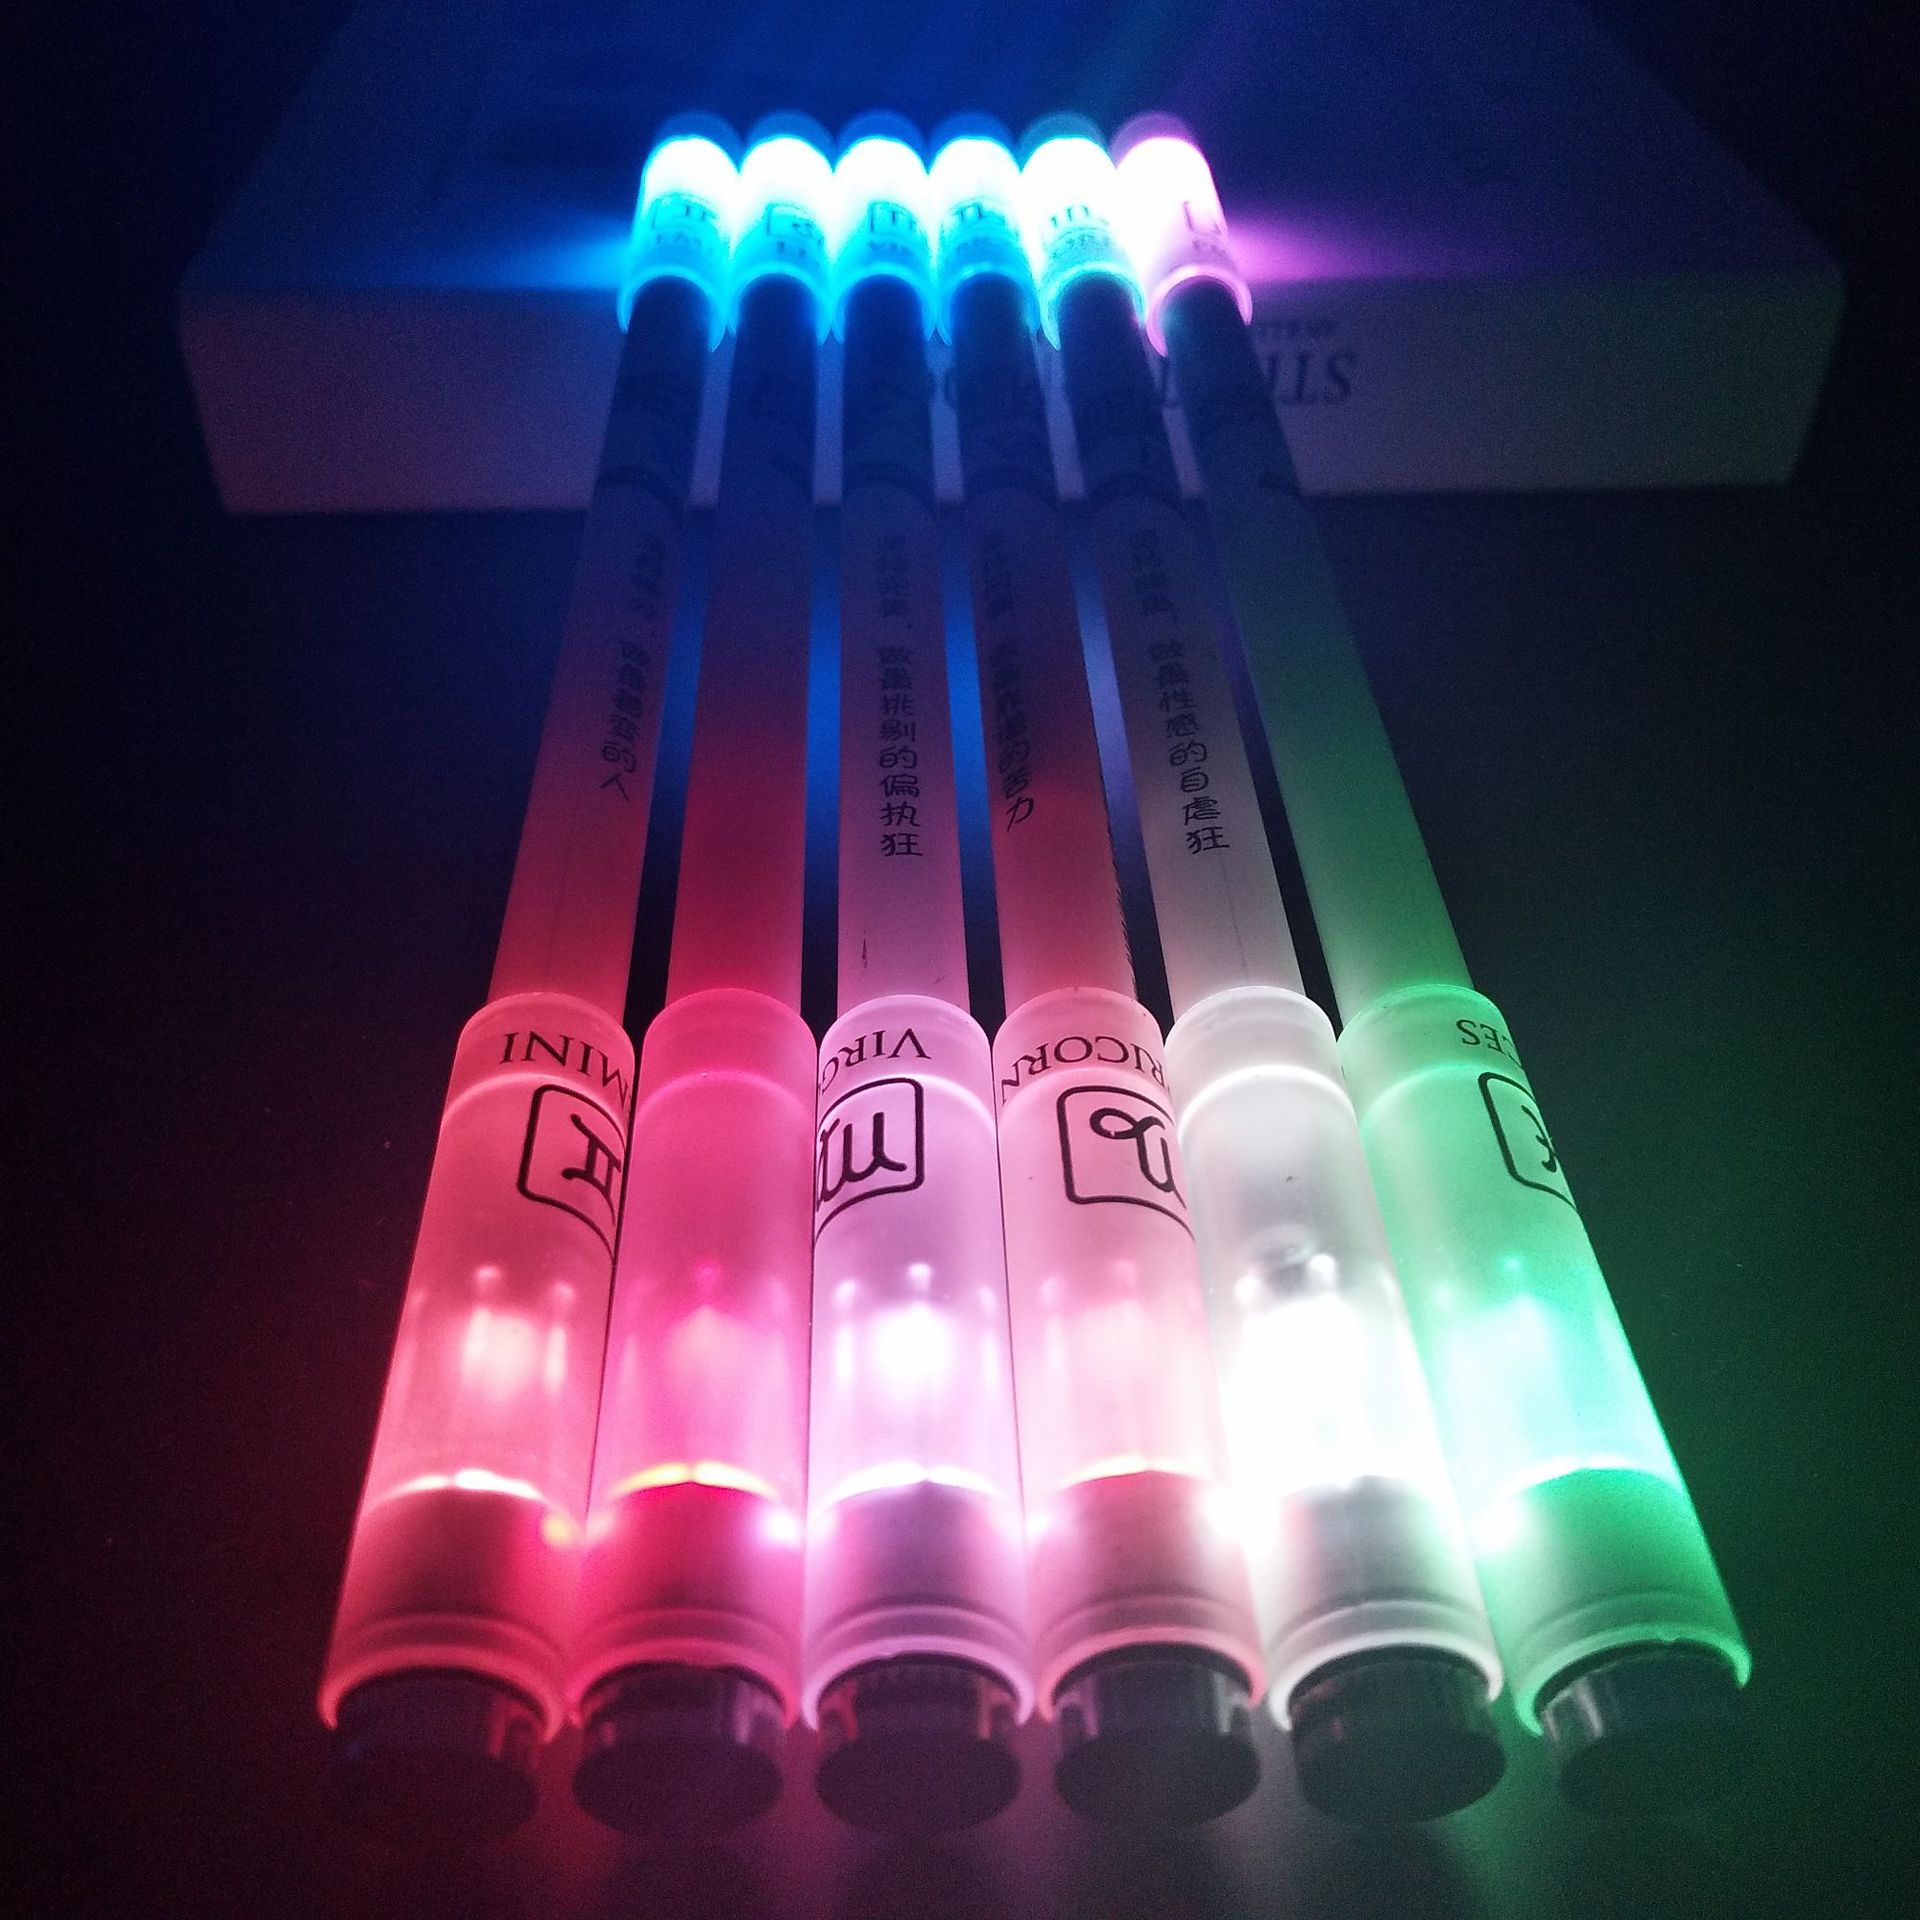 Hot Sales 1 Piece High Quality LED Flash Gel Pen Students Fashion Flash Spinning Pen Kids Christmas Gift Office Supply